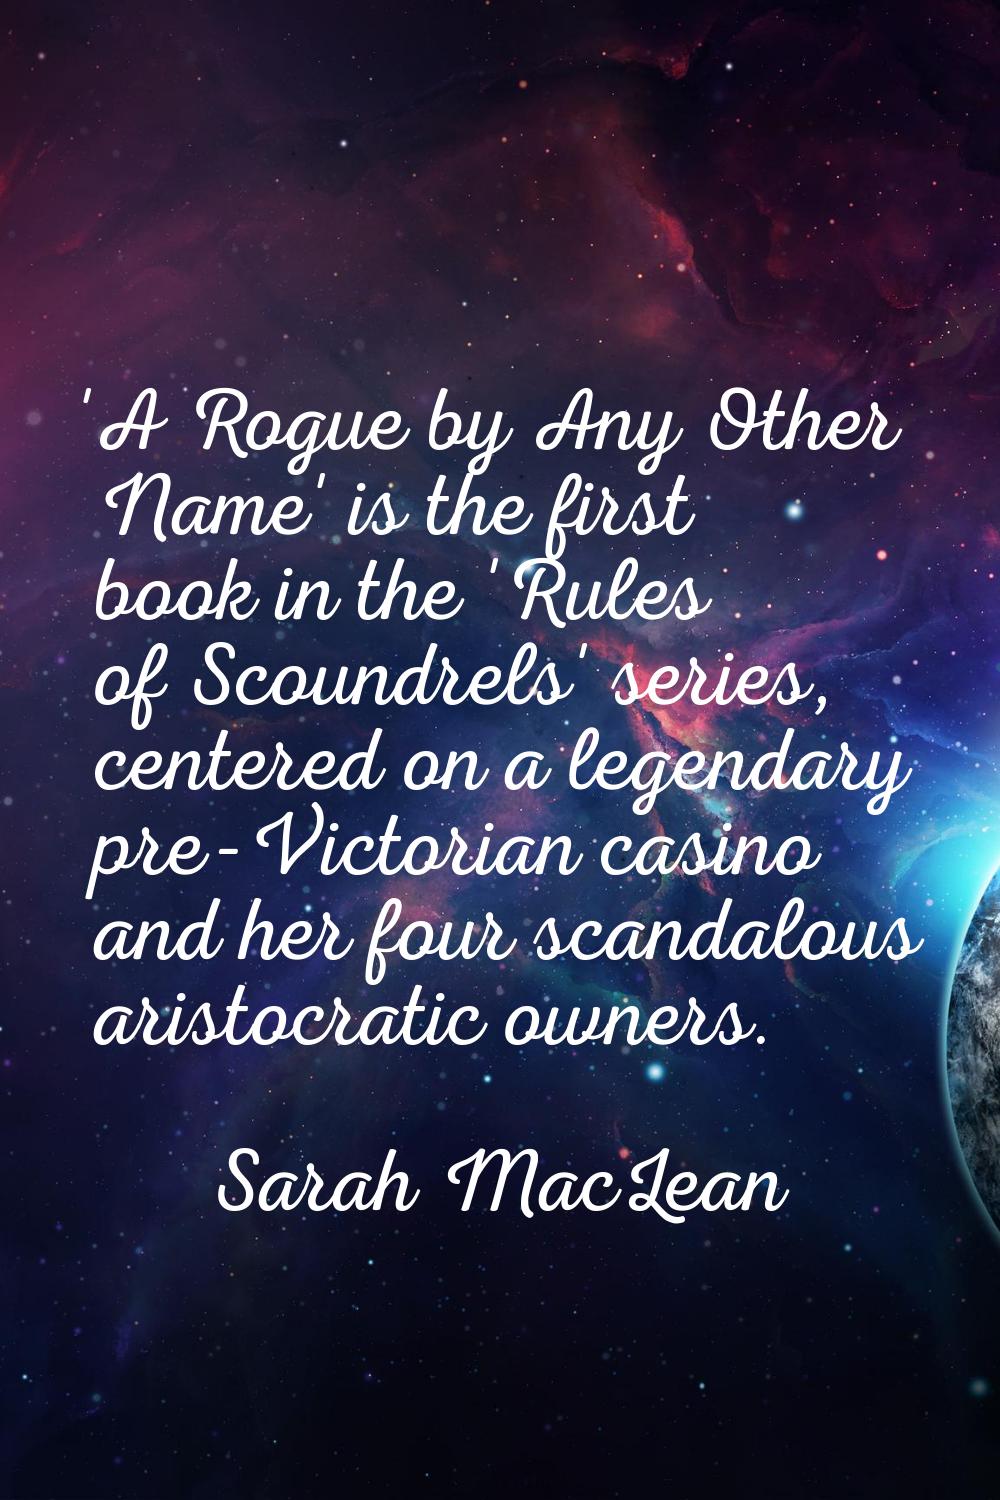 'A Rogue by Any Other Name' is the first book in the 'Rules of Scoundrels' series, centered on a le